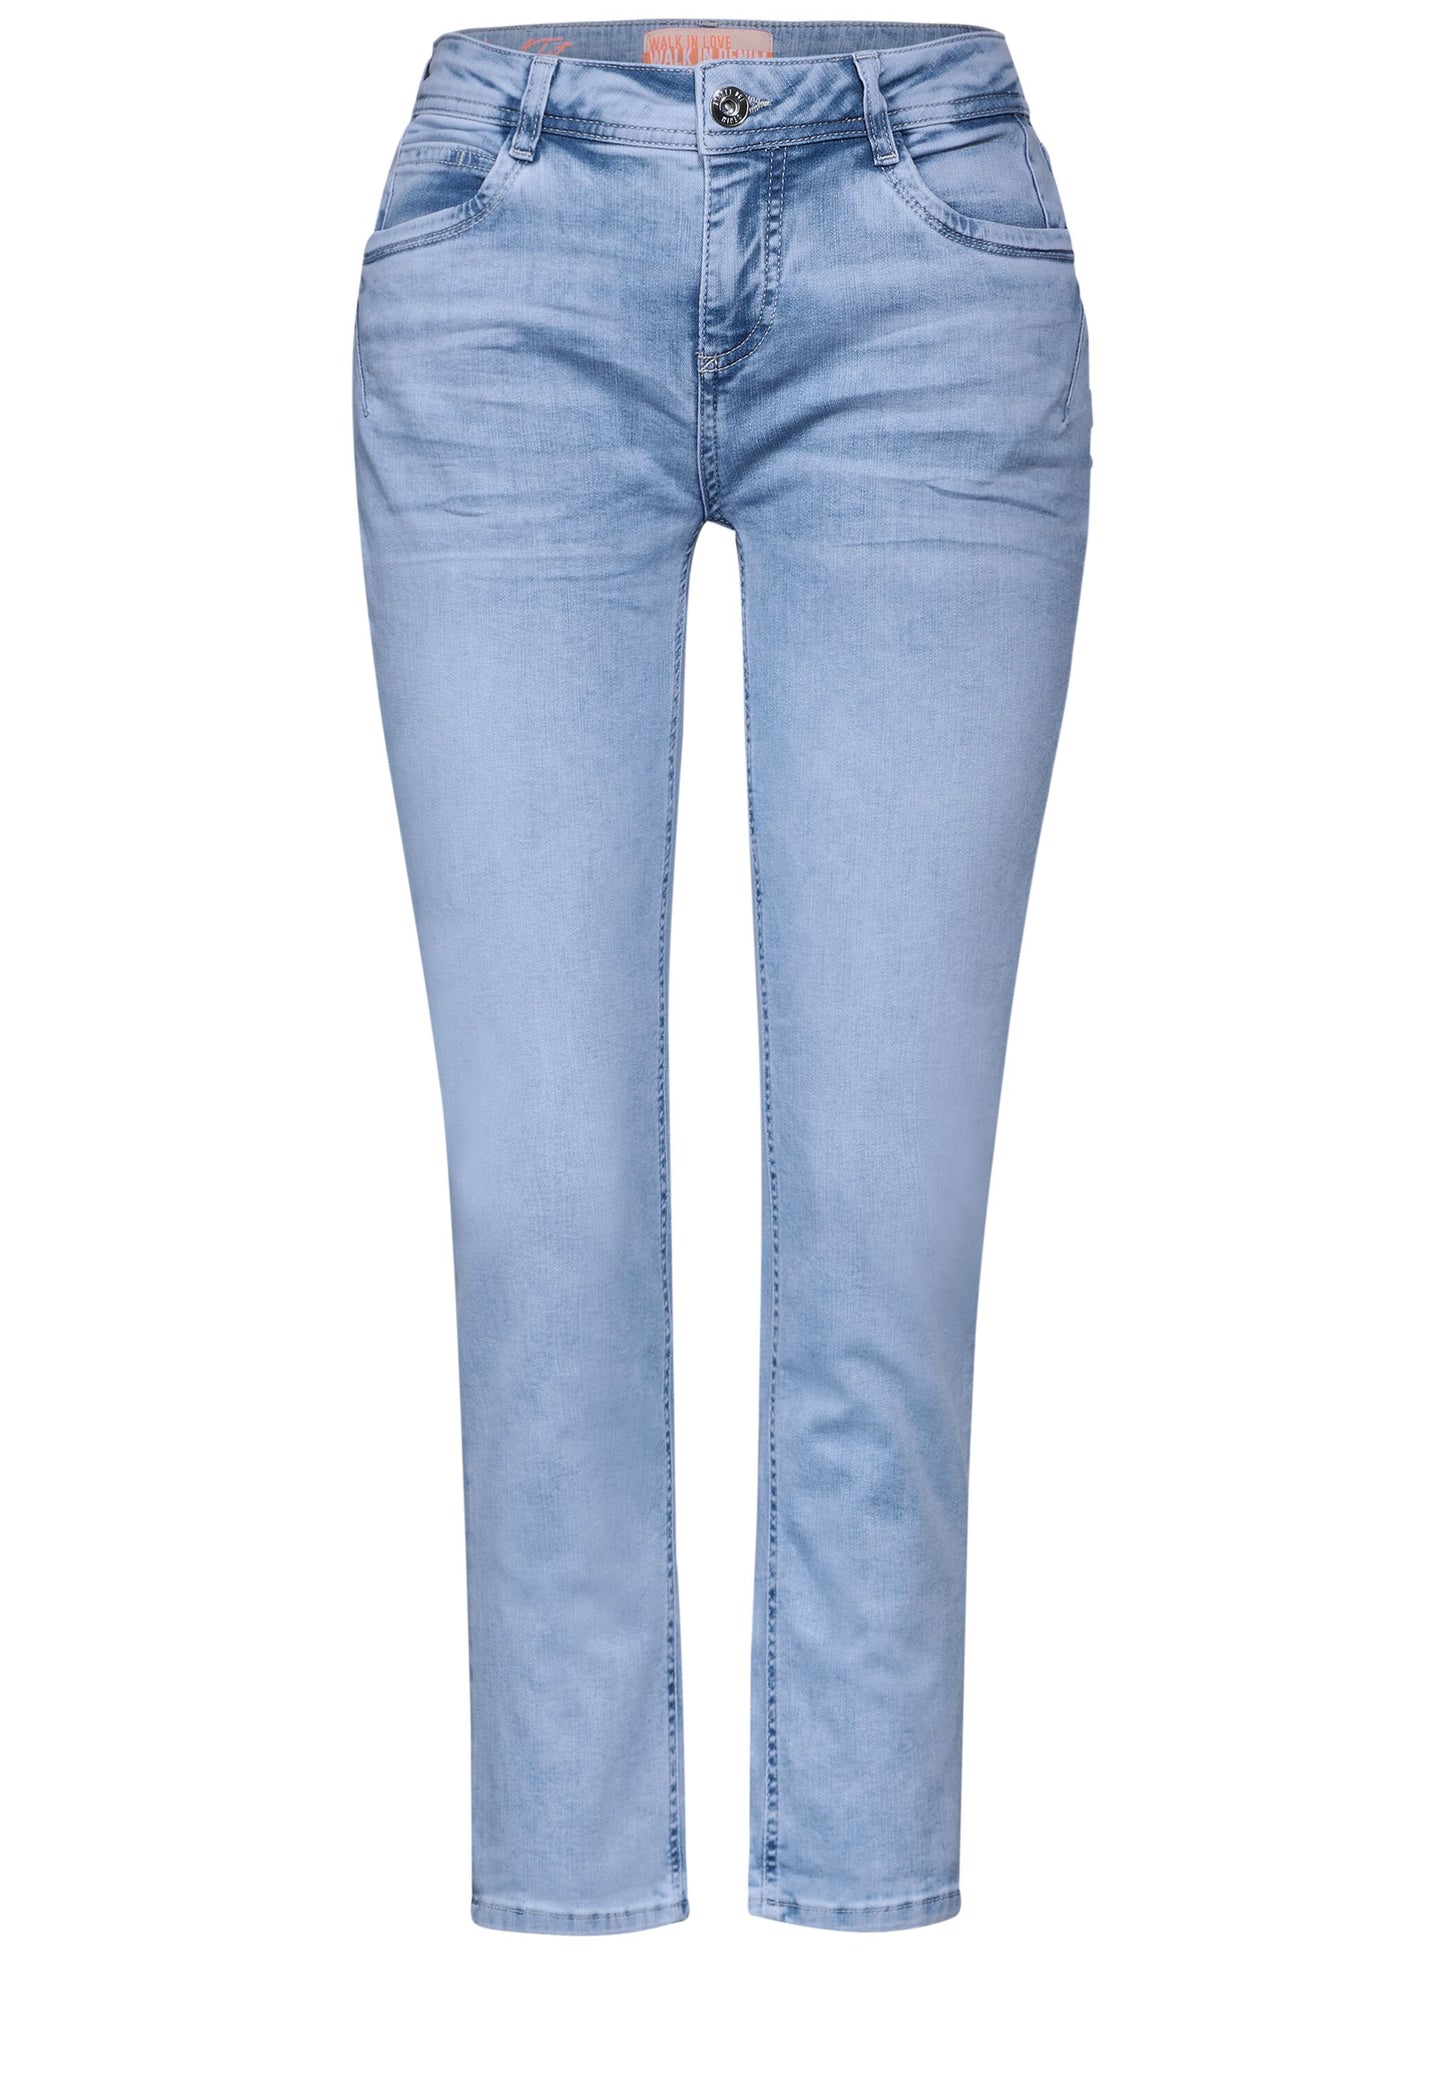 Street One - 7/8 Casual Fit Jeans - super light blue washed